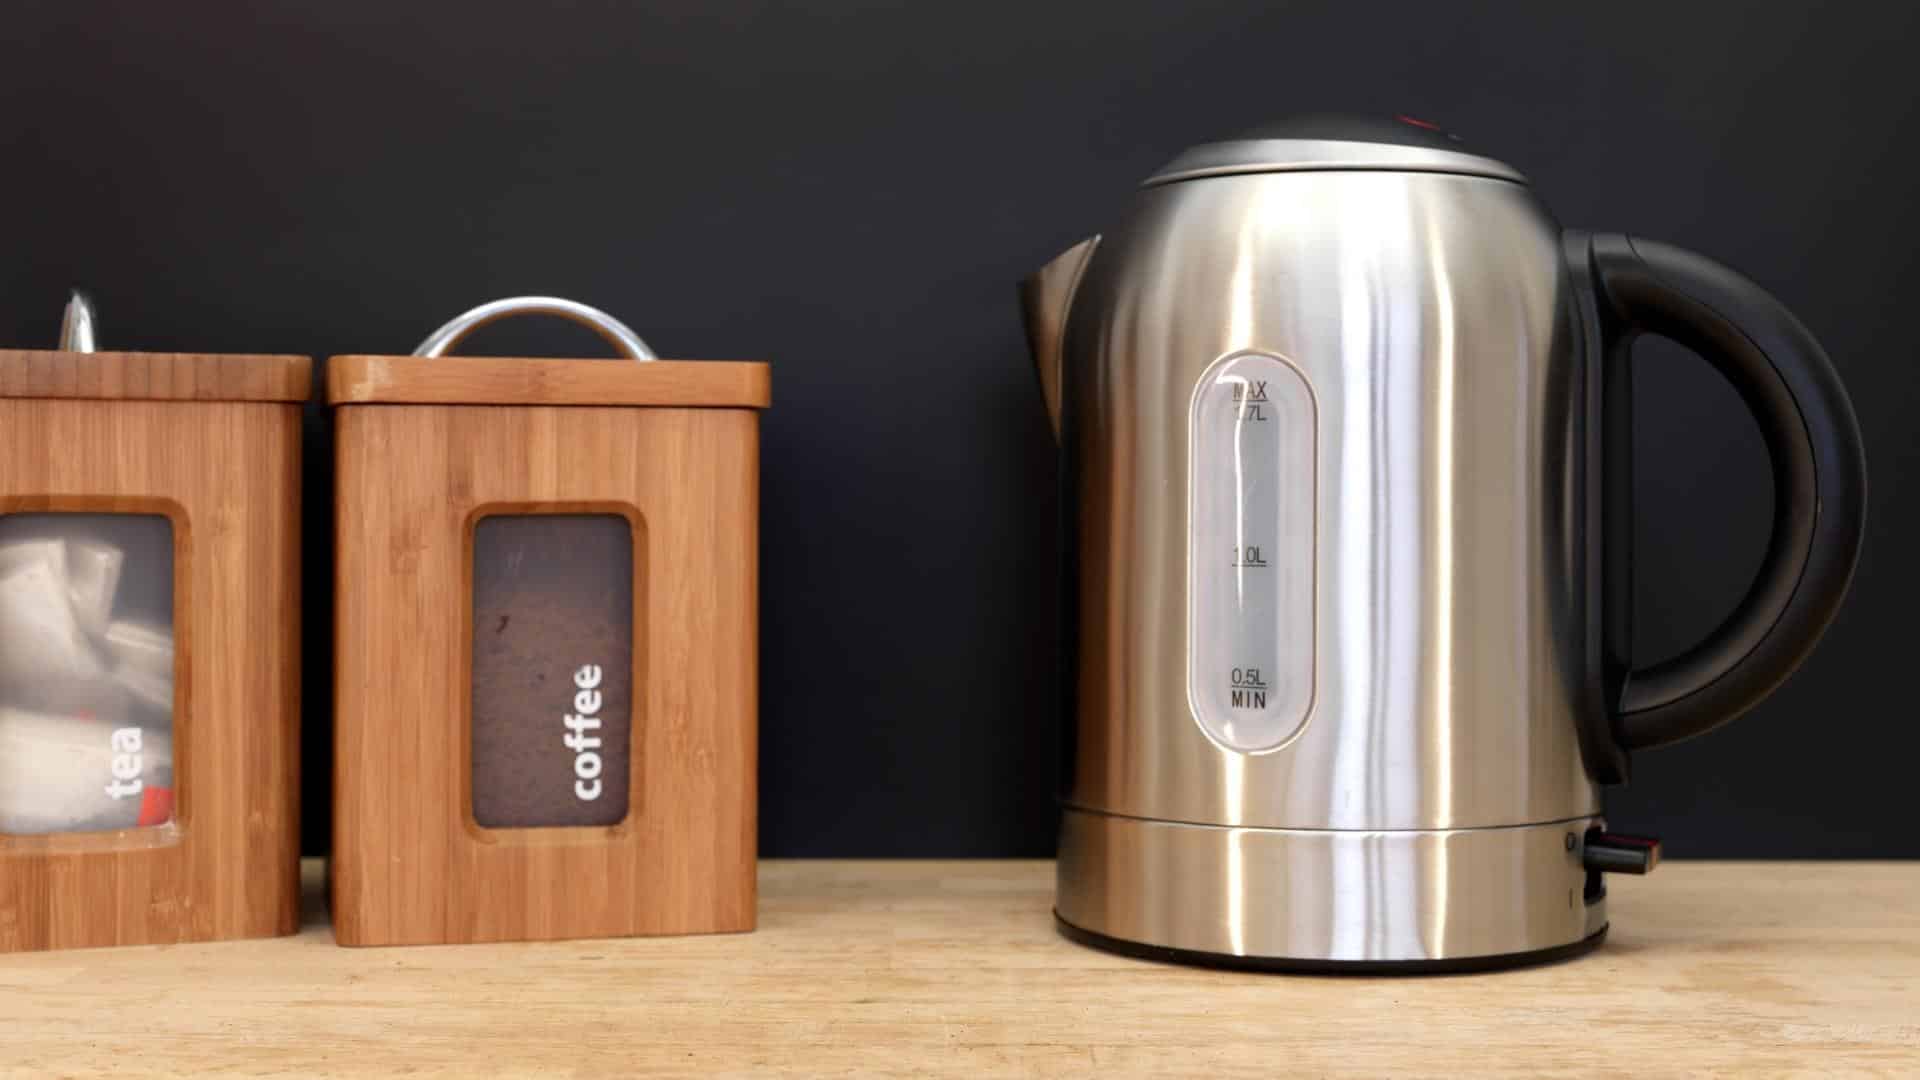 https://energyrates.ca/wp-content/uploads/electric-kettle.jpg